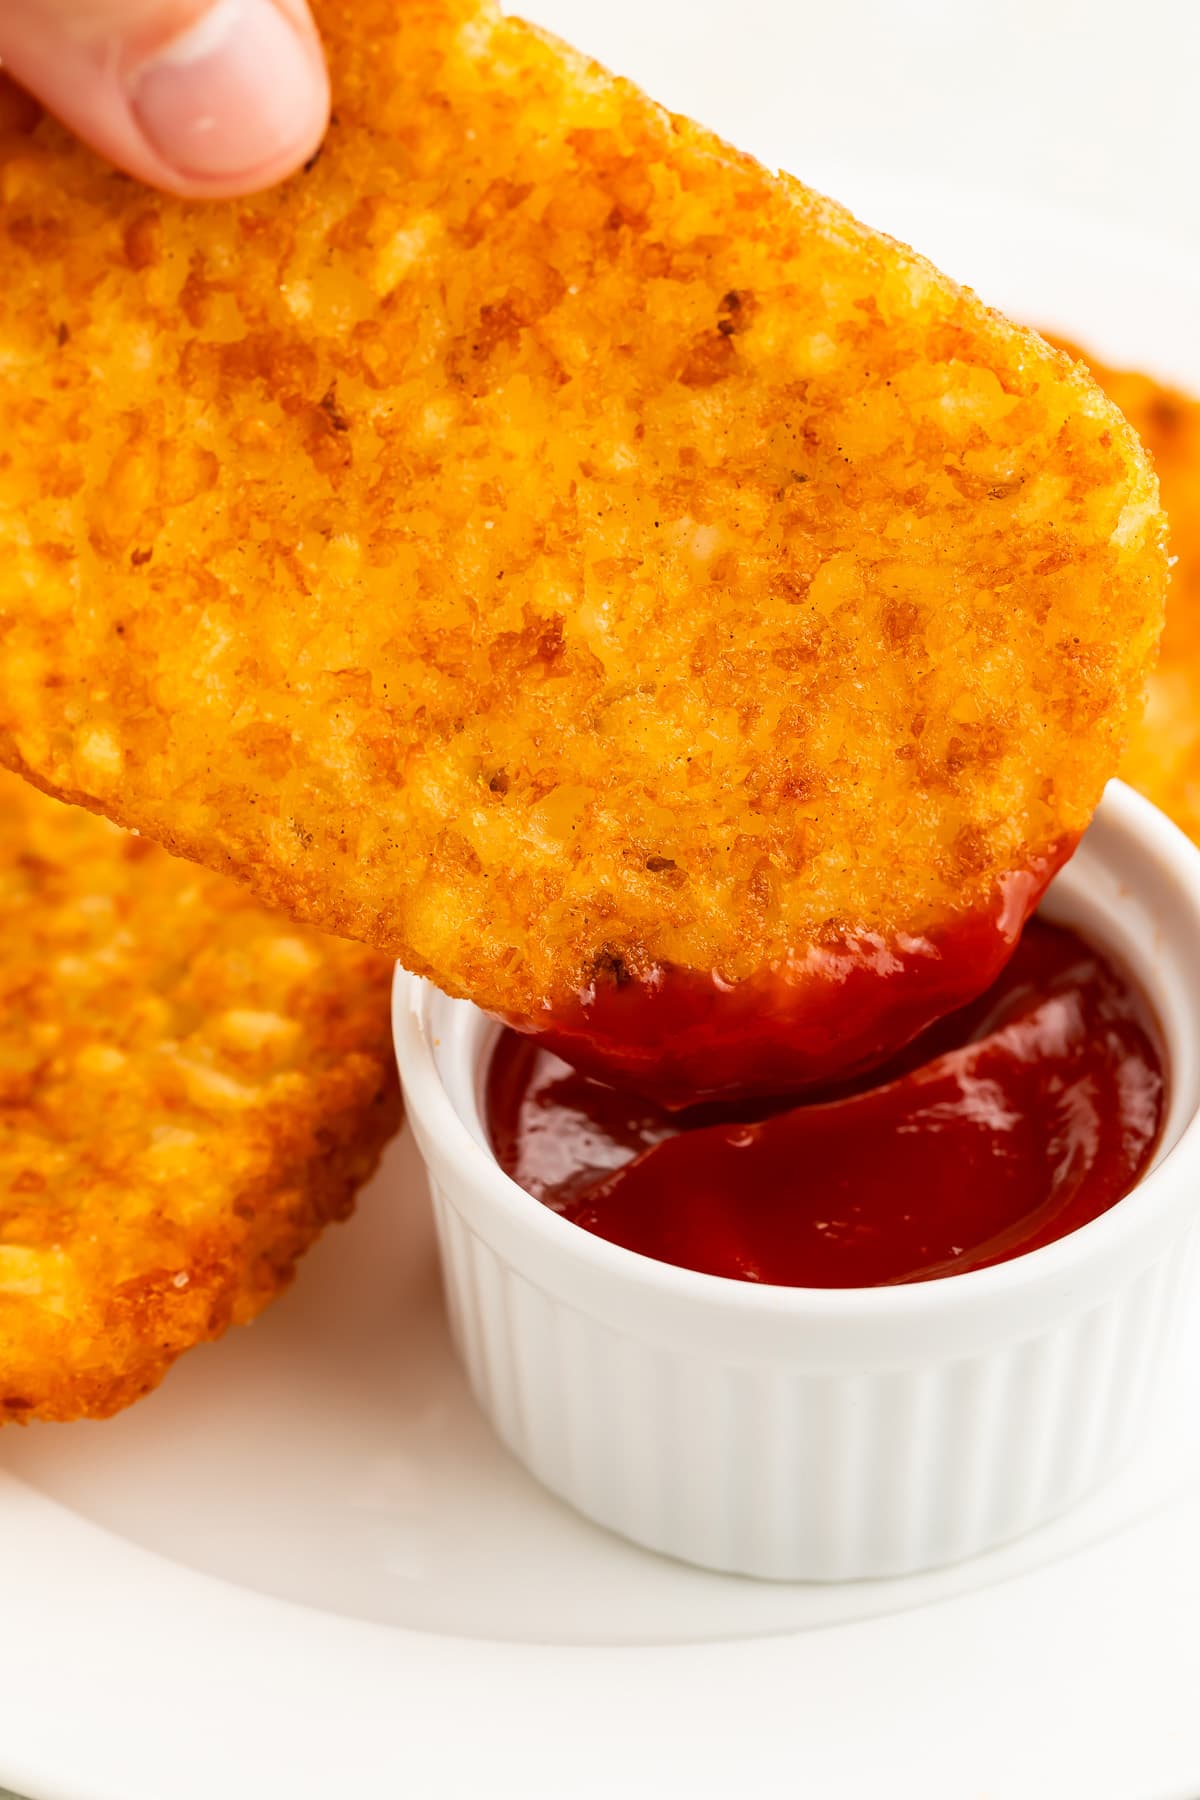 1 of 4 frozen hash brown patties, cooked in the air fryer, being dipped into a small ramekin of red ketchup.